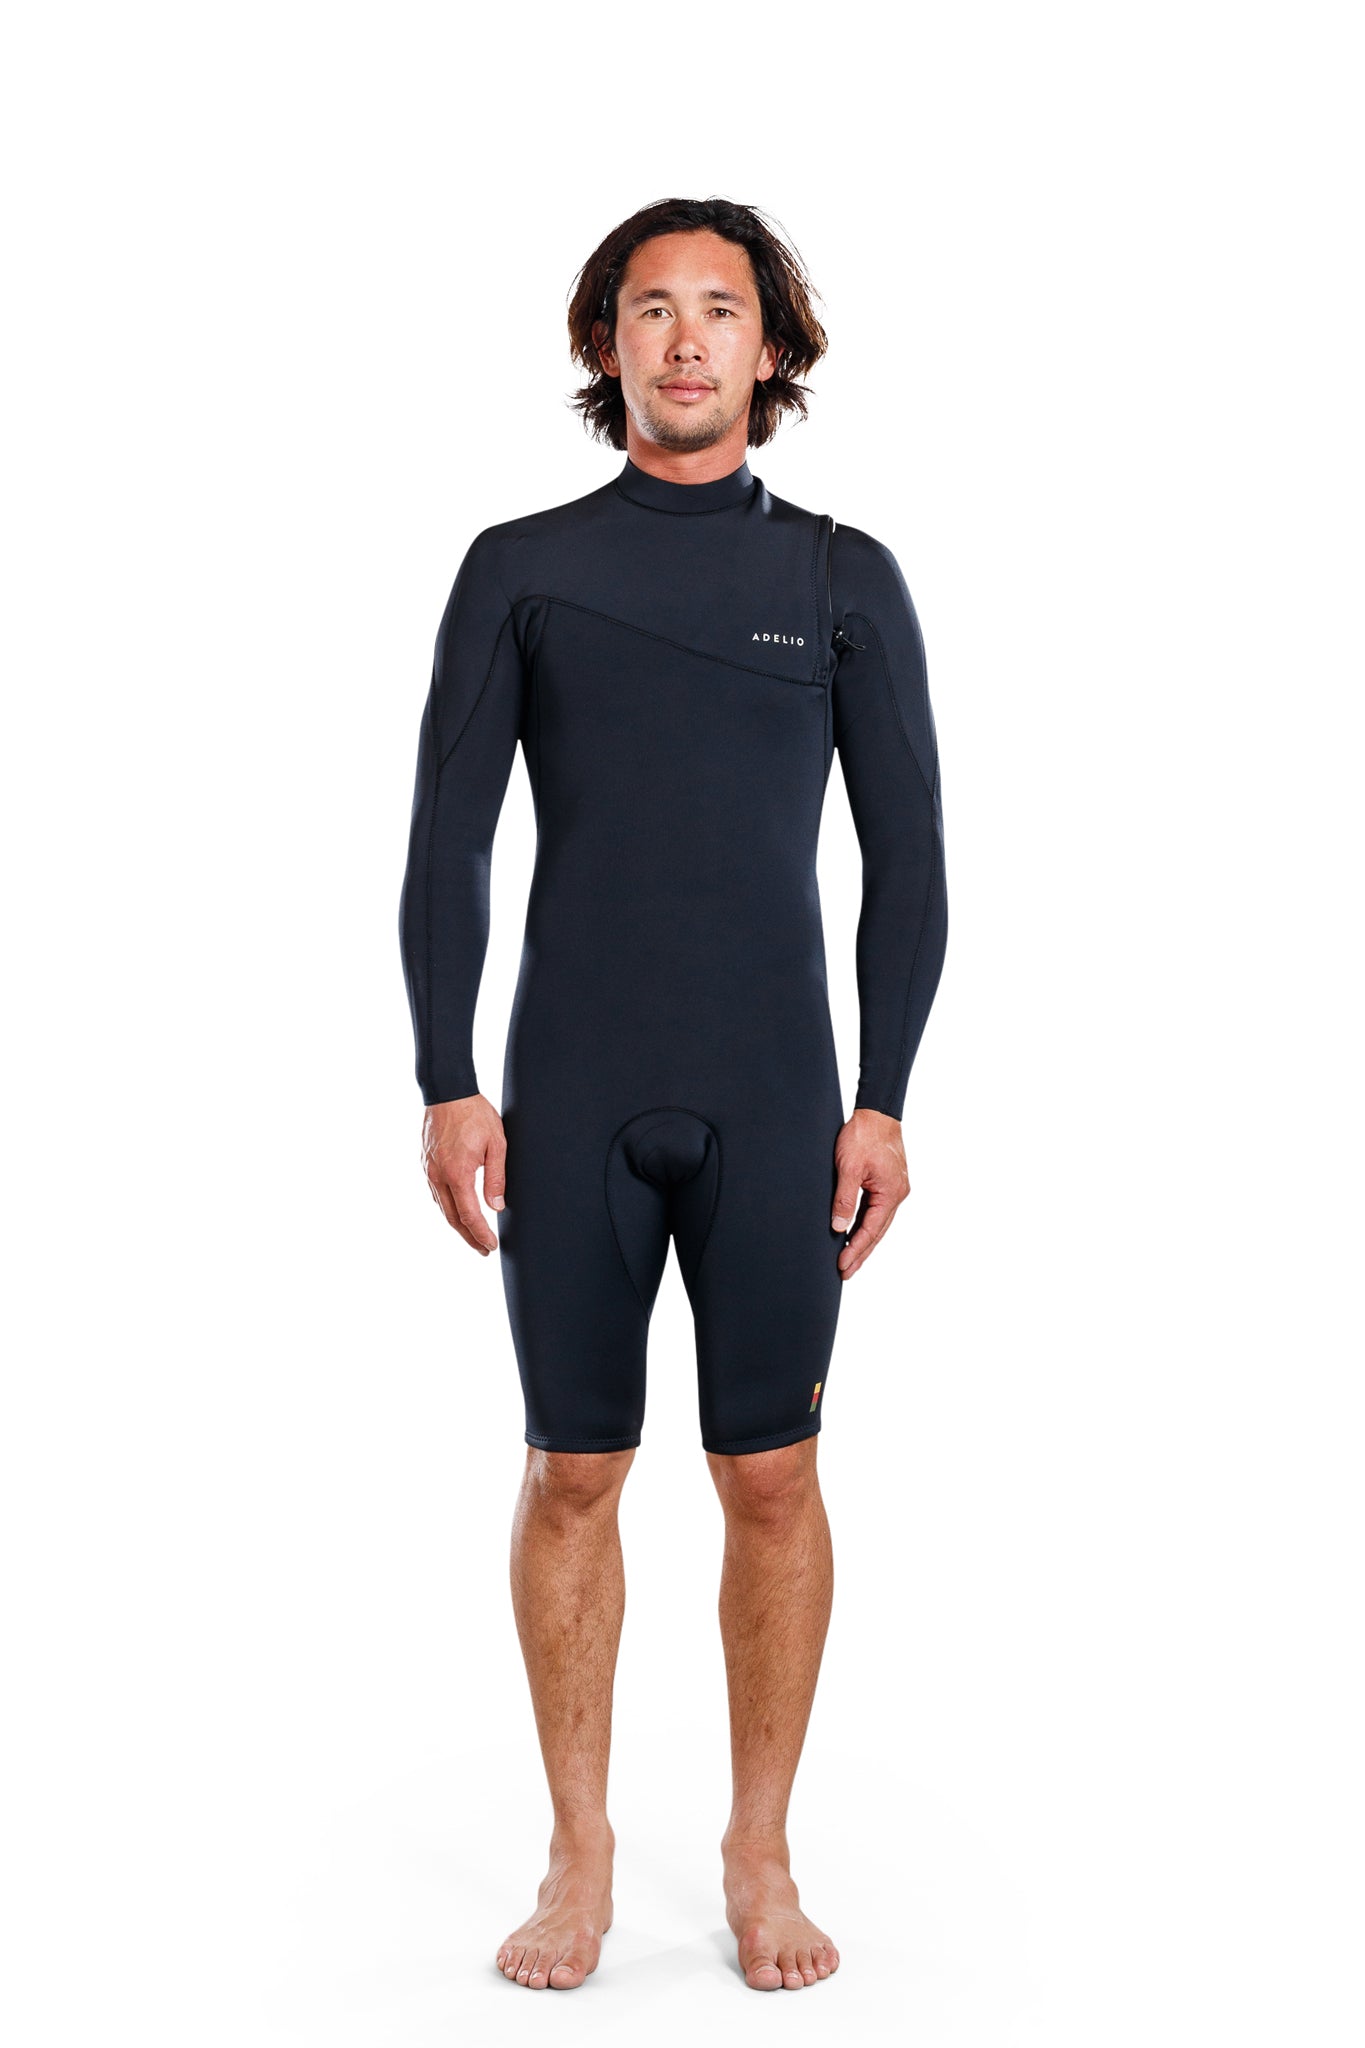 Adelio Taylor Long Arm Zipperless Spring Wetsuit – Adelio Wetsuits United  States